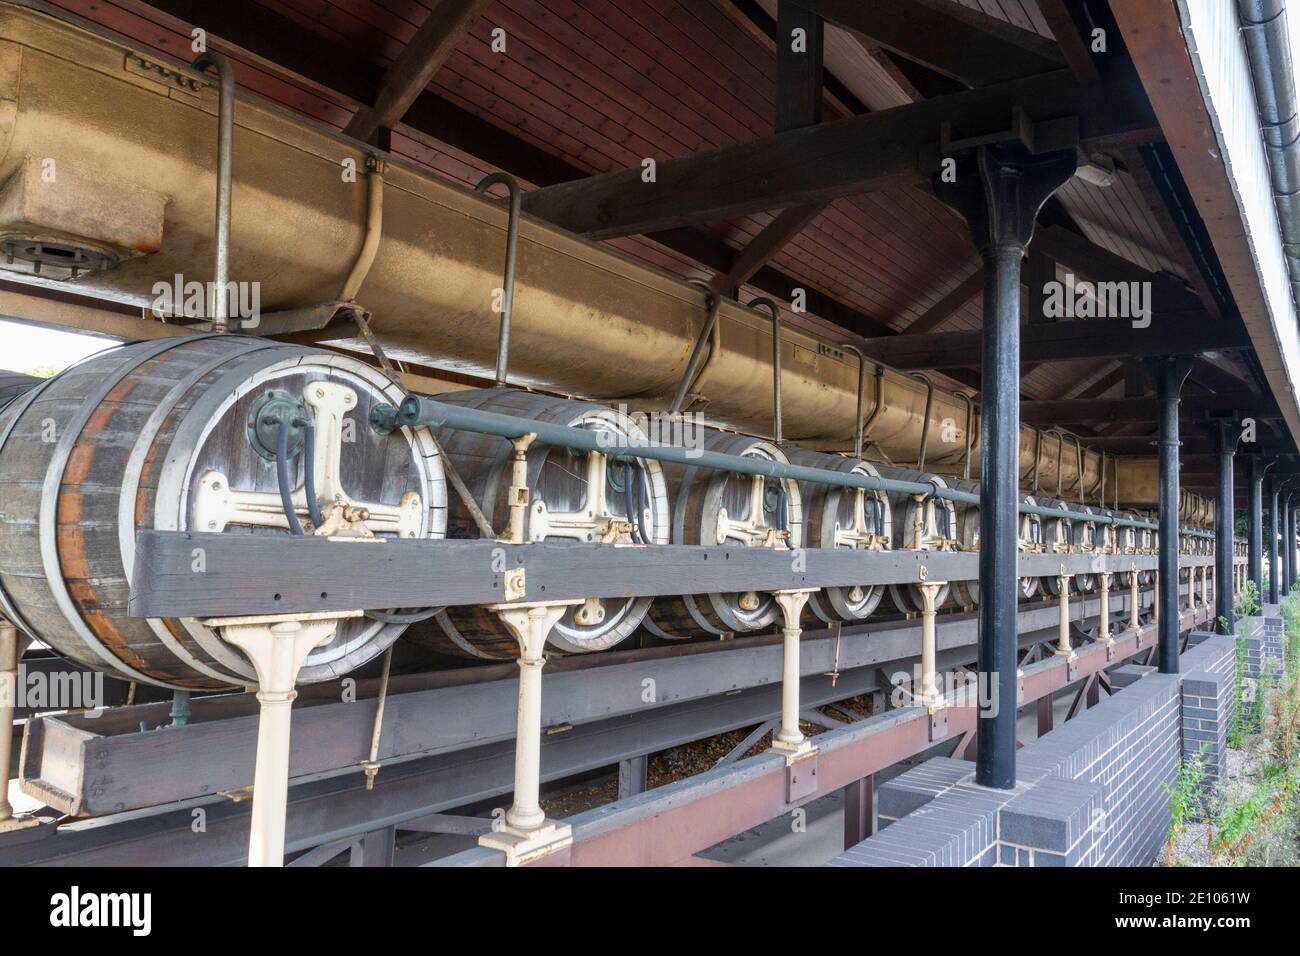 Row of barrels, the Burton Union System, National Brewery Centre, Burton  upon Trent, (Burton-on-Trent or Burton), a market town in Staffordshire, UK  Stock Photo - Alamy